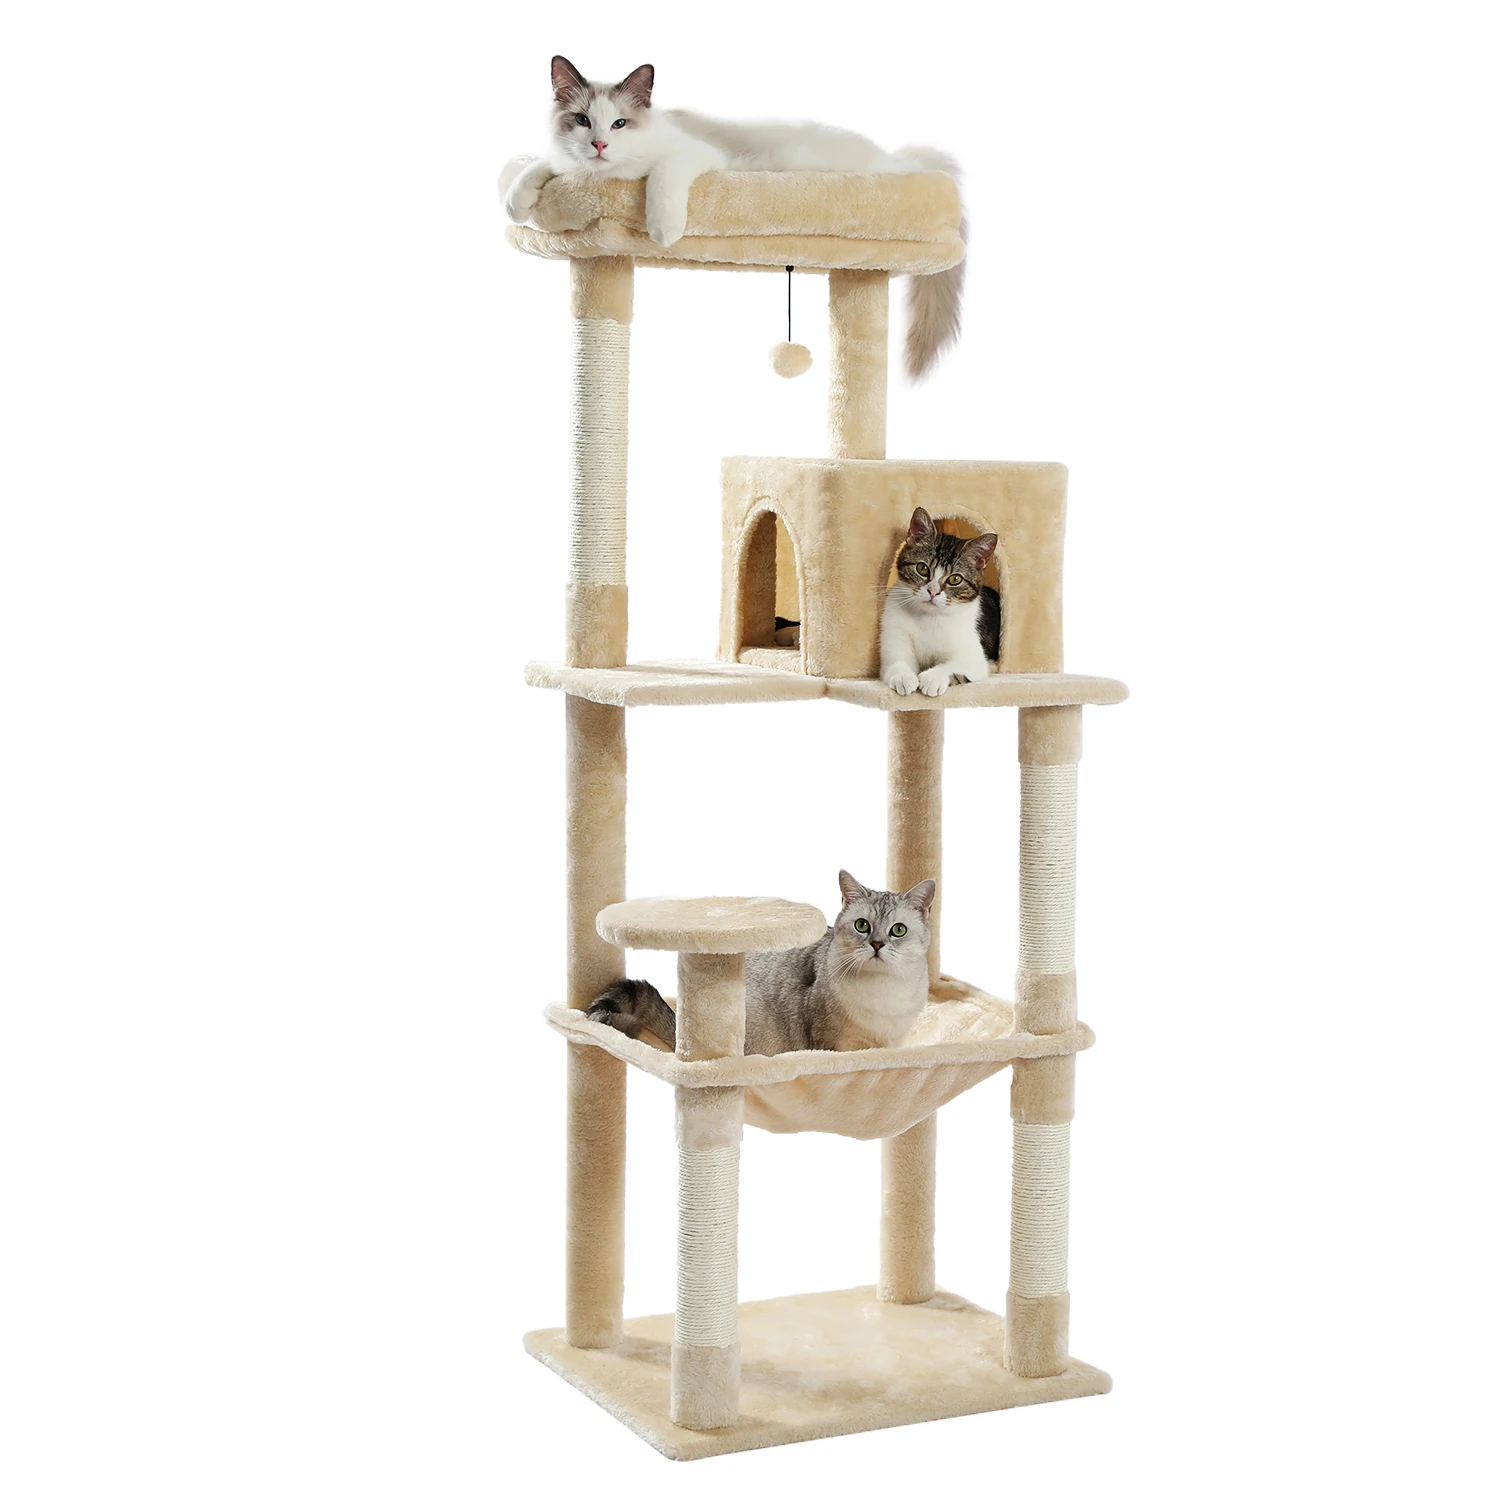 Donia Cat Tree cat Tower Multi-Storey cat House Apartment with Scratching Post Indoor Small and Medium-Sized cat Rack Furniture Plush Habitat Plush Toys Rock Climbing Play House Center 